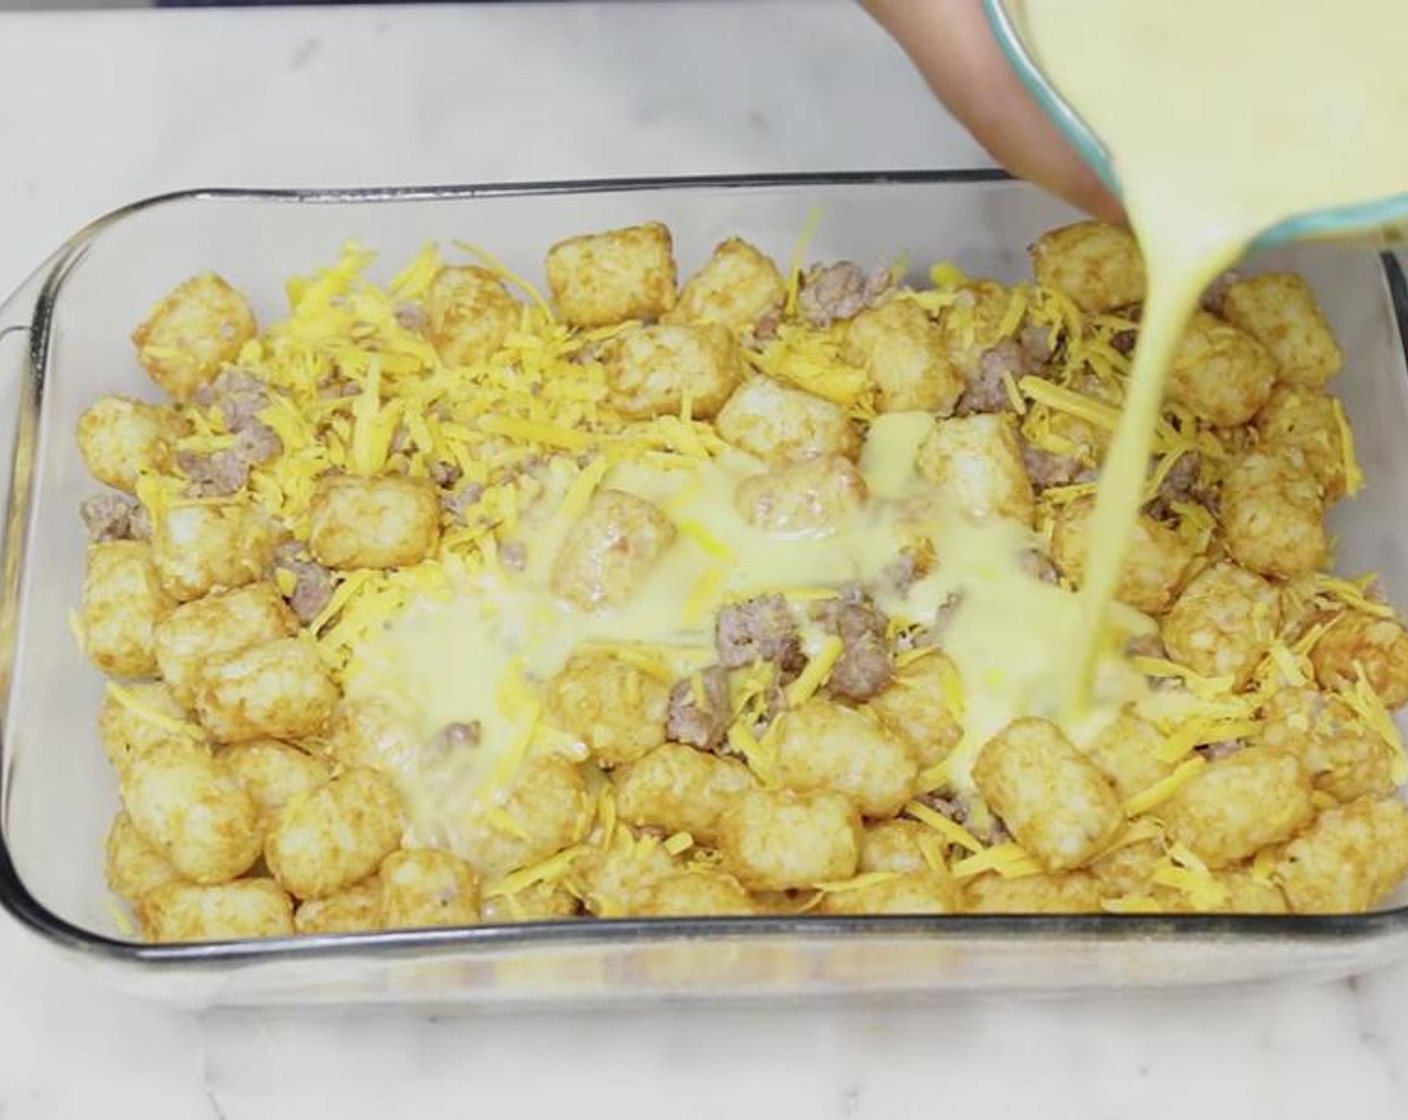 step 4 In a large bowl, toss together Frozen Tater Tots (9 cups), sausage and Cheddar Cheese (2 cups). Pour into baking dish. Pour the egg mixture all over. Sprinkle more cheese if you wish.